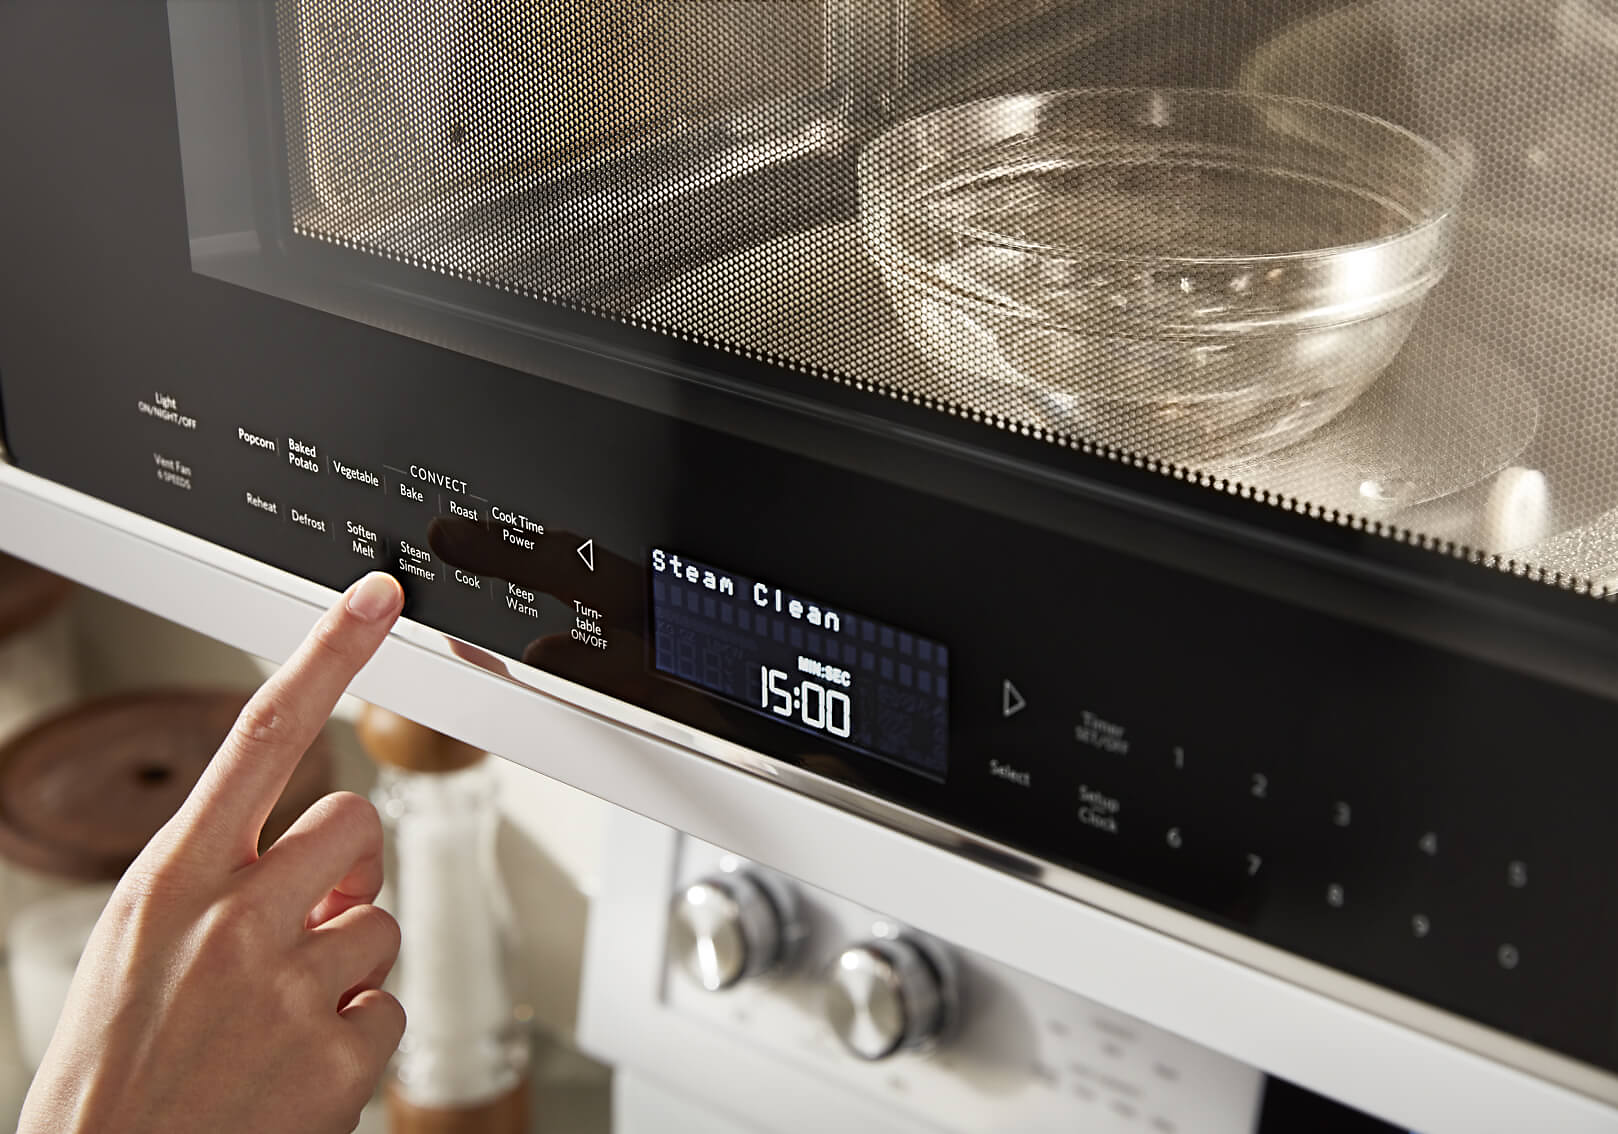 Hand selecting the Steam Clean option on a microwave console